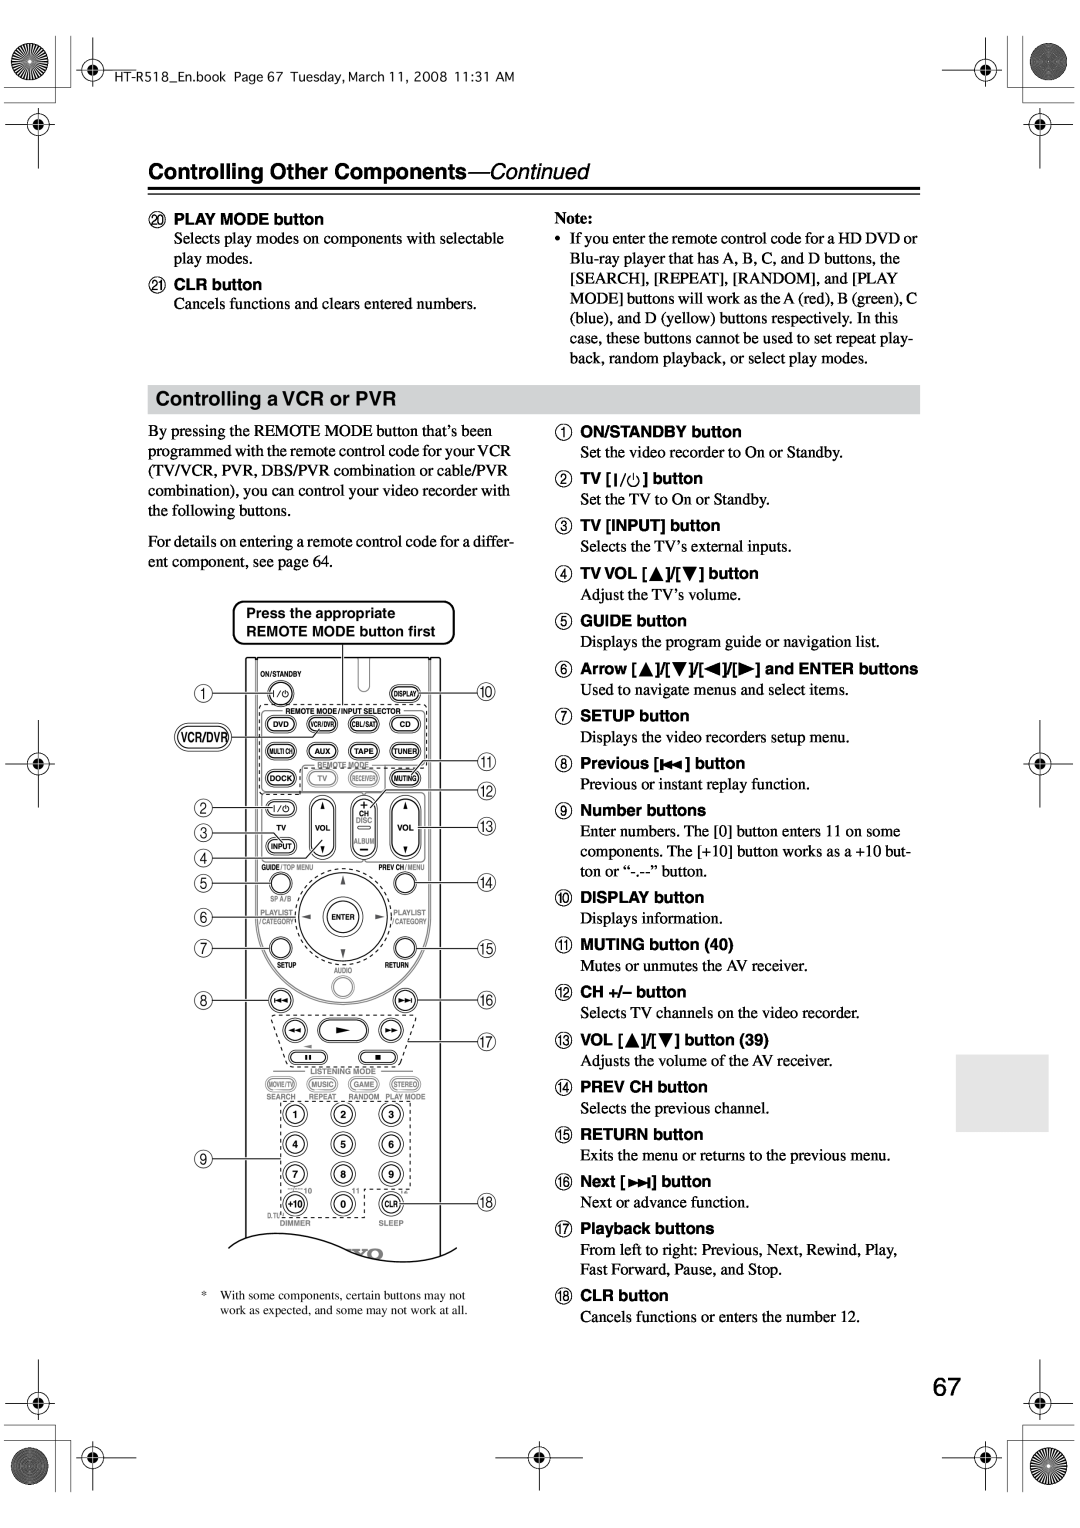 Onkyo HT-R518 instruction manual Controlling a VCR or PVR, Controlling Other Components-Continued 